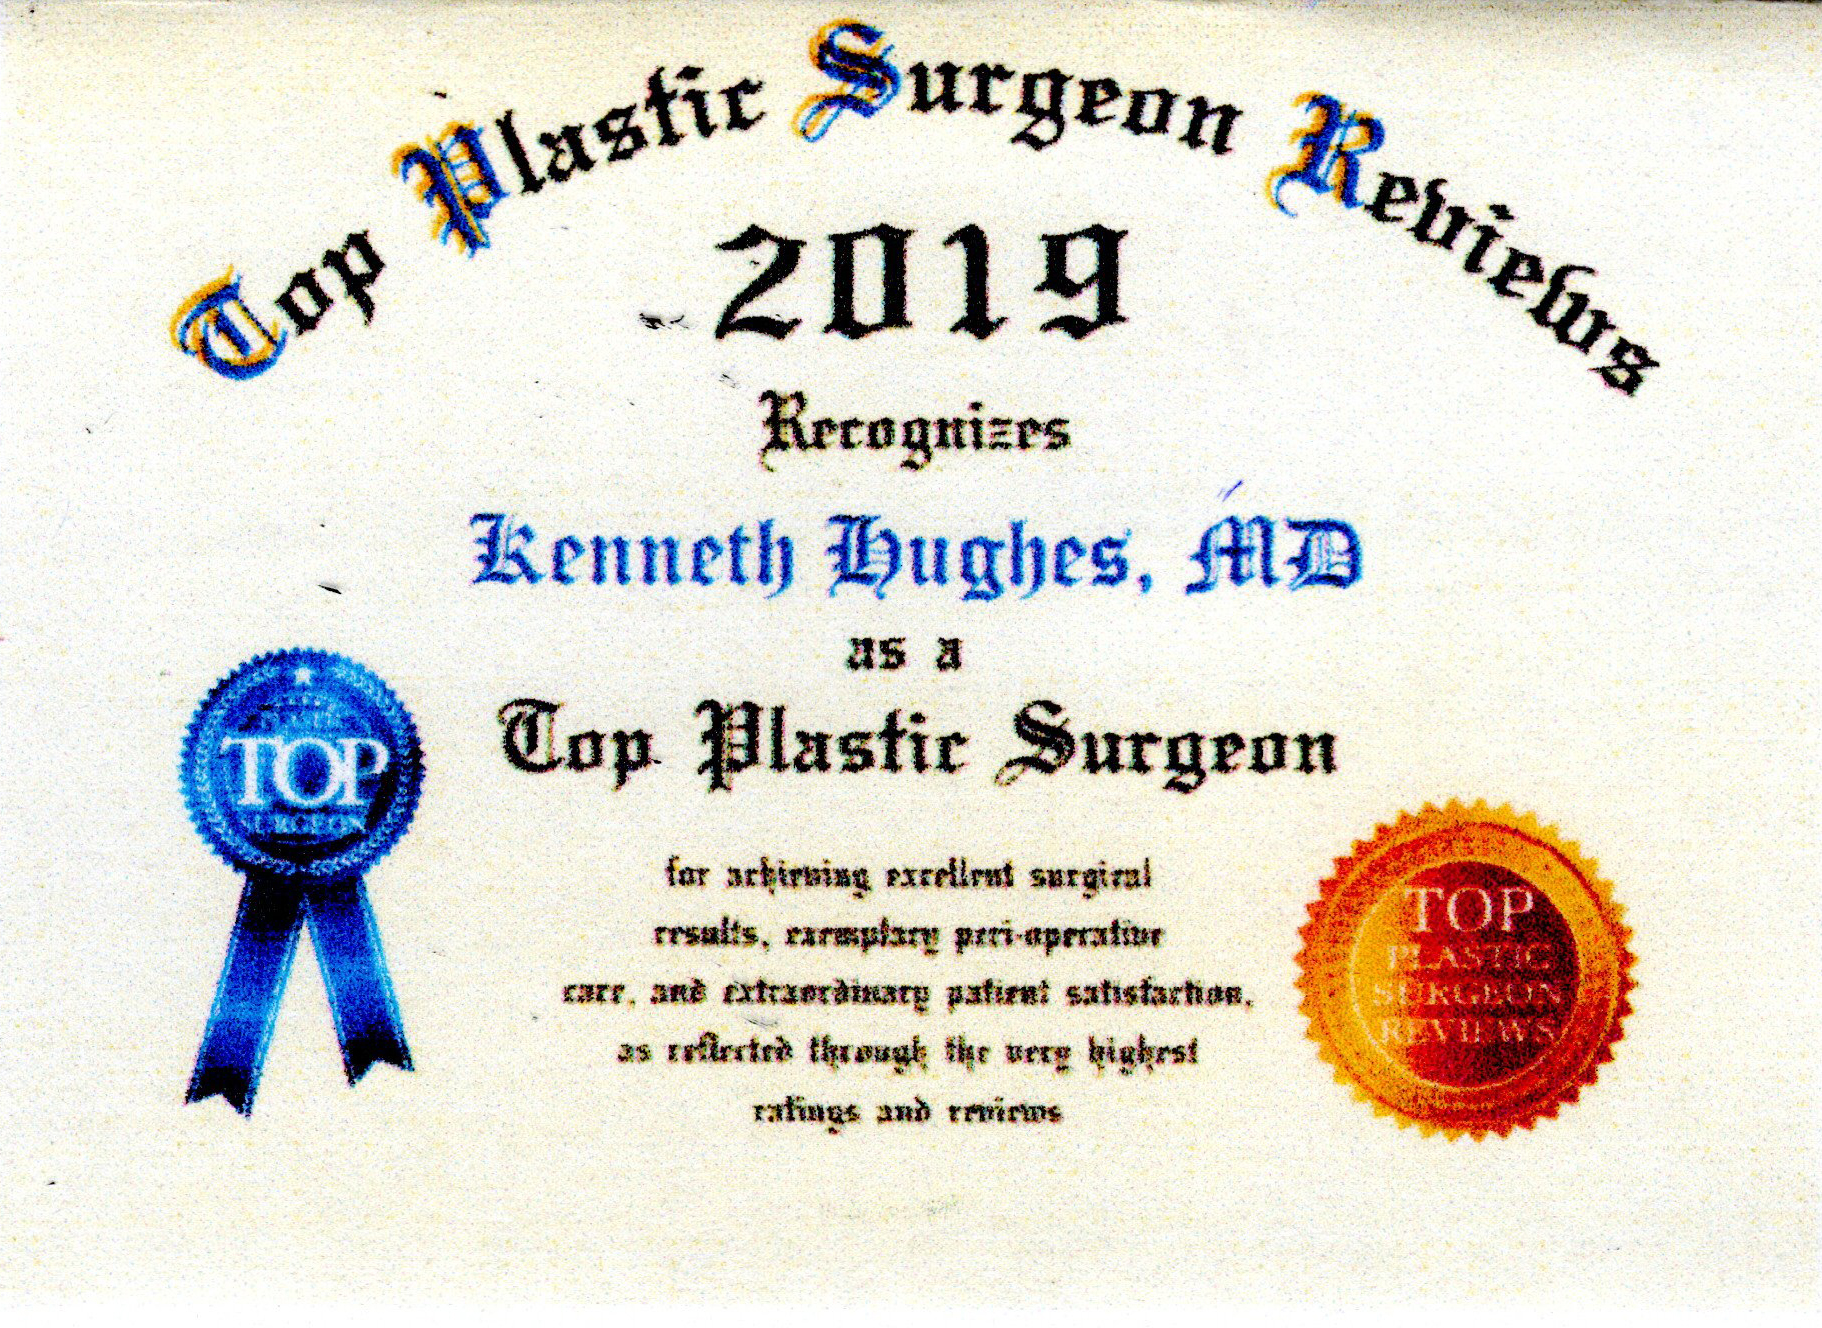 Dr. Kenneth Hughes Selected as Top Plastic Surgeon 2019